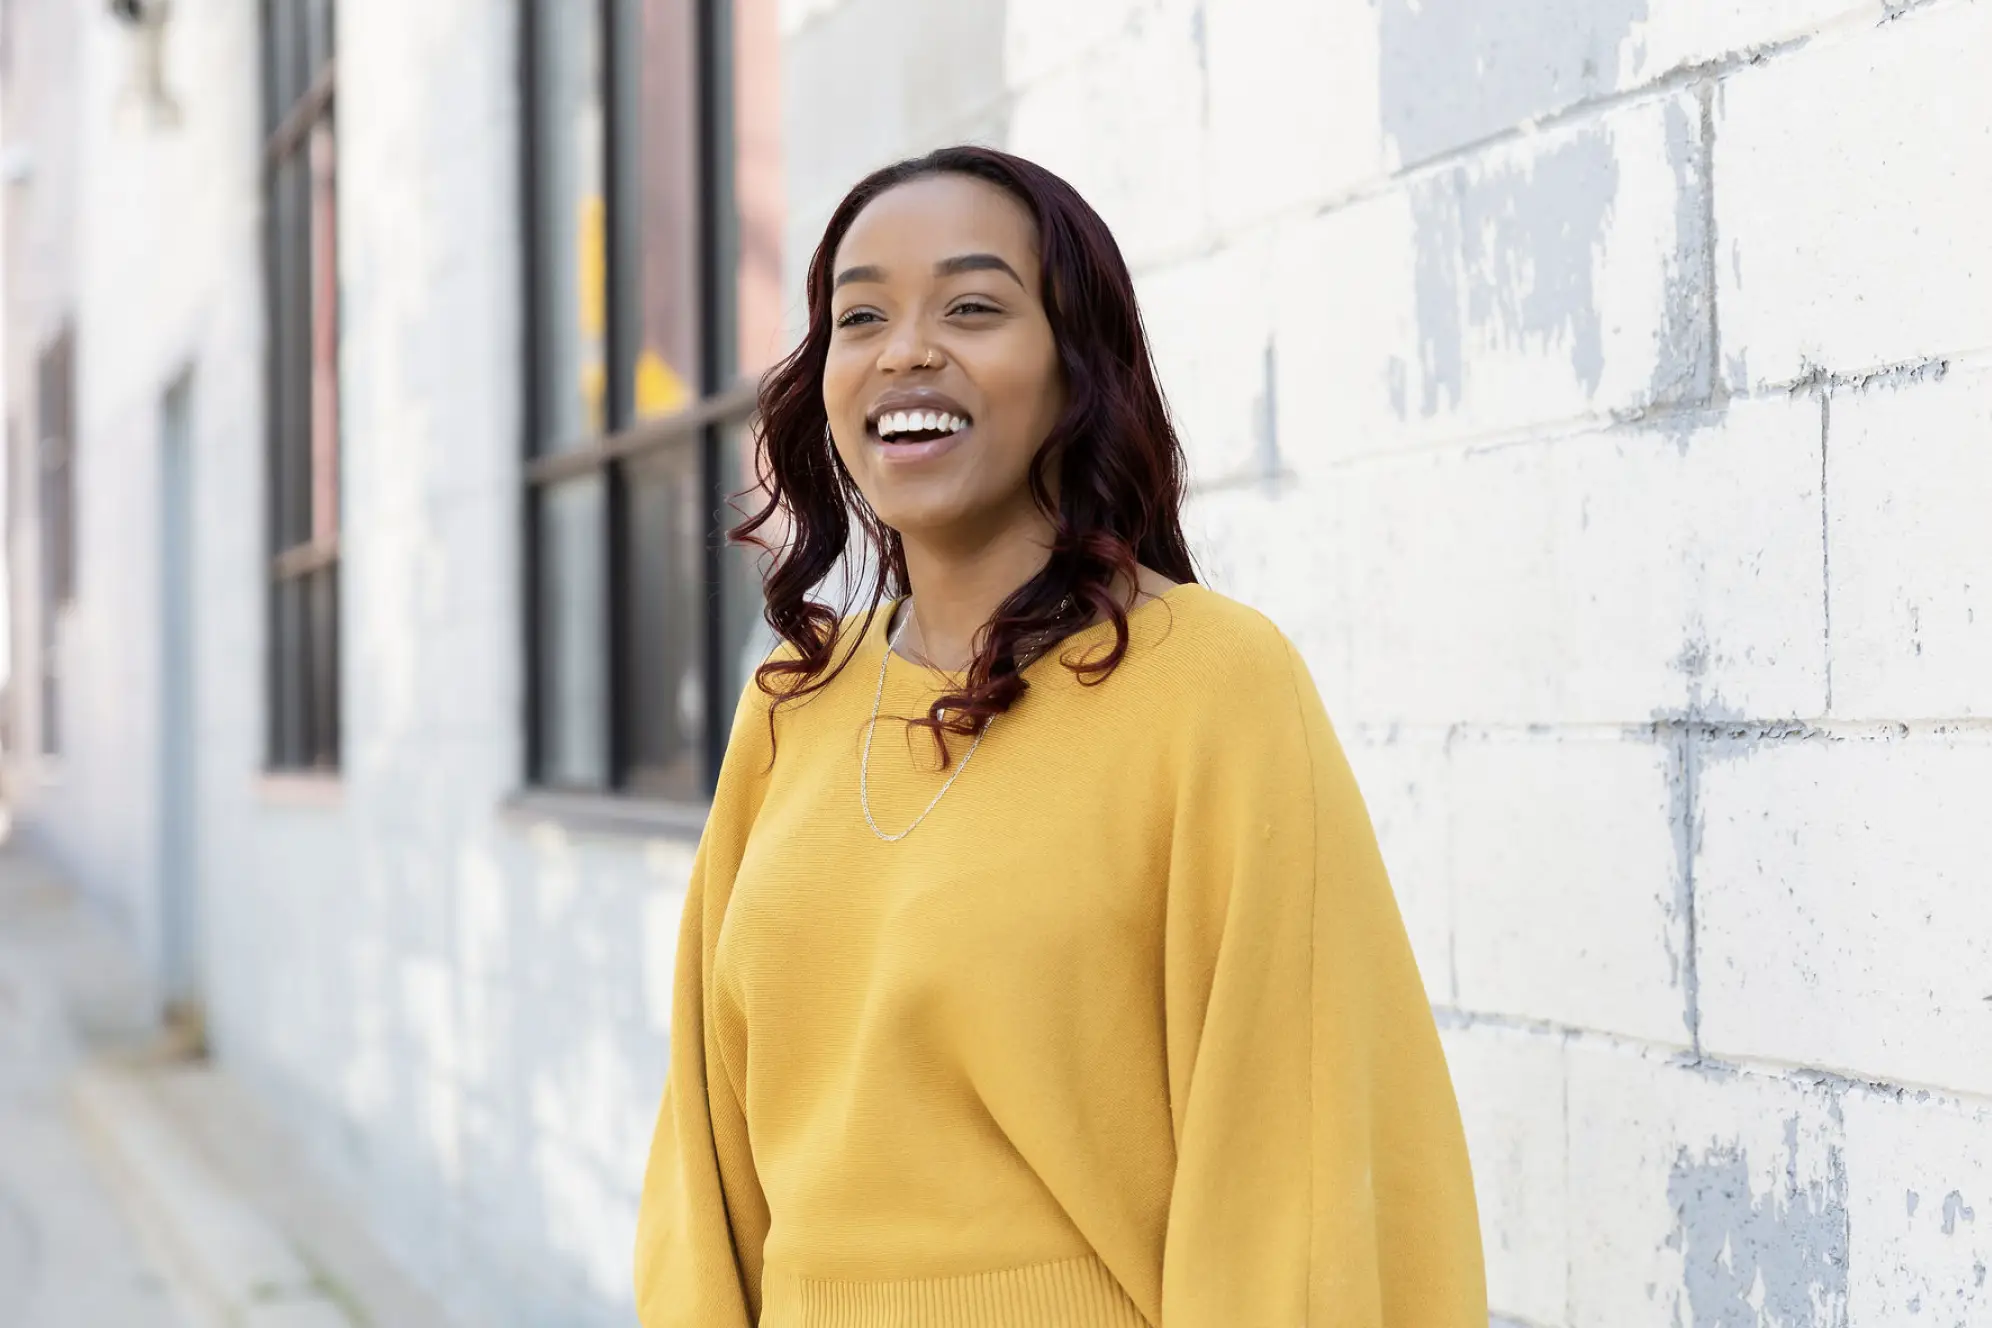 Woman in yellow sweater laughing in front of painted brick wall